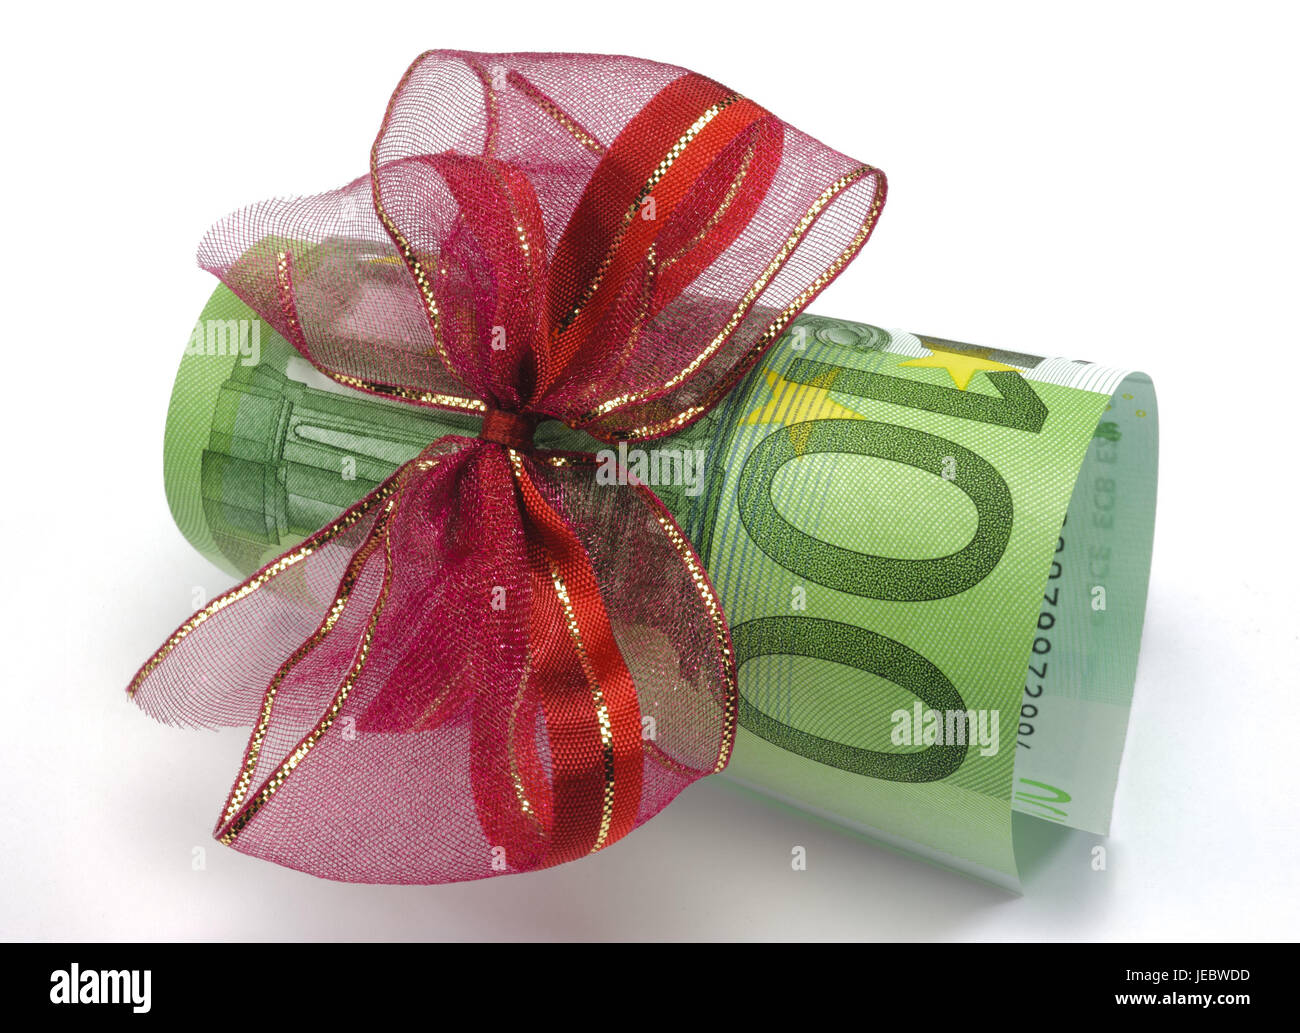 Gift of money, loop, 100, bank note, cash, bonus, Einhundert - euros, incomes, income, eurolight, finances, red, Frei's plate, joy, birthday, salary increase, money, gift of money, banknote, present, profit, wrapping tape, luck, congratulation, green, coupon, hundred, jubilee, paper money, present, loop, role, around, light, give, black money, donation, business expenses, currency, Stock Photo